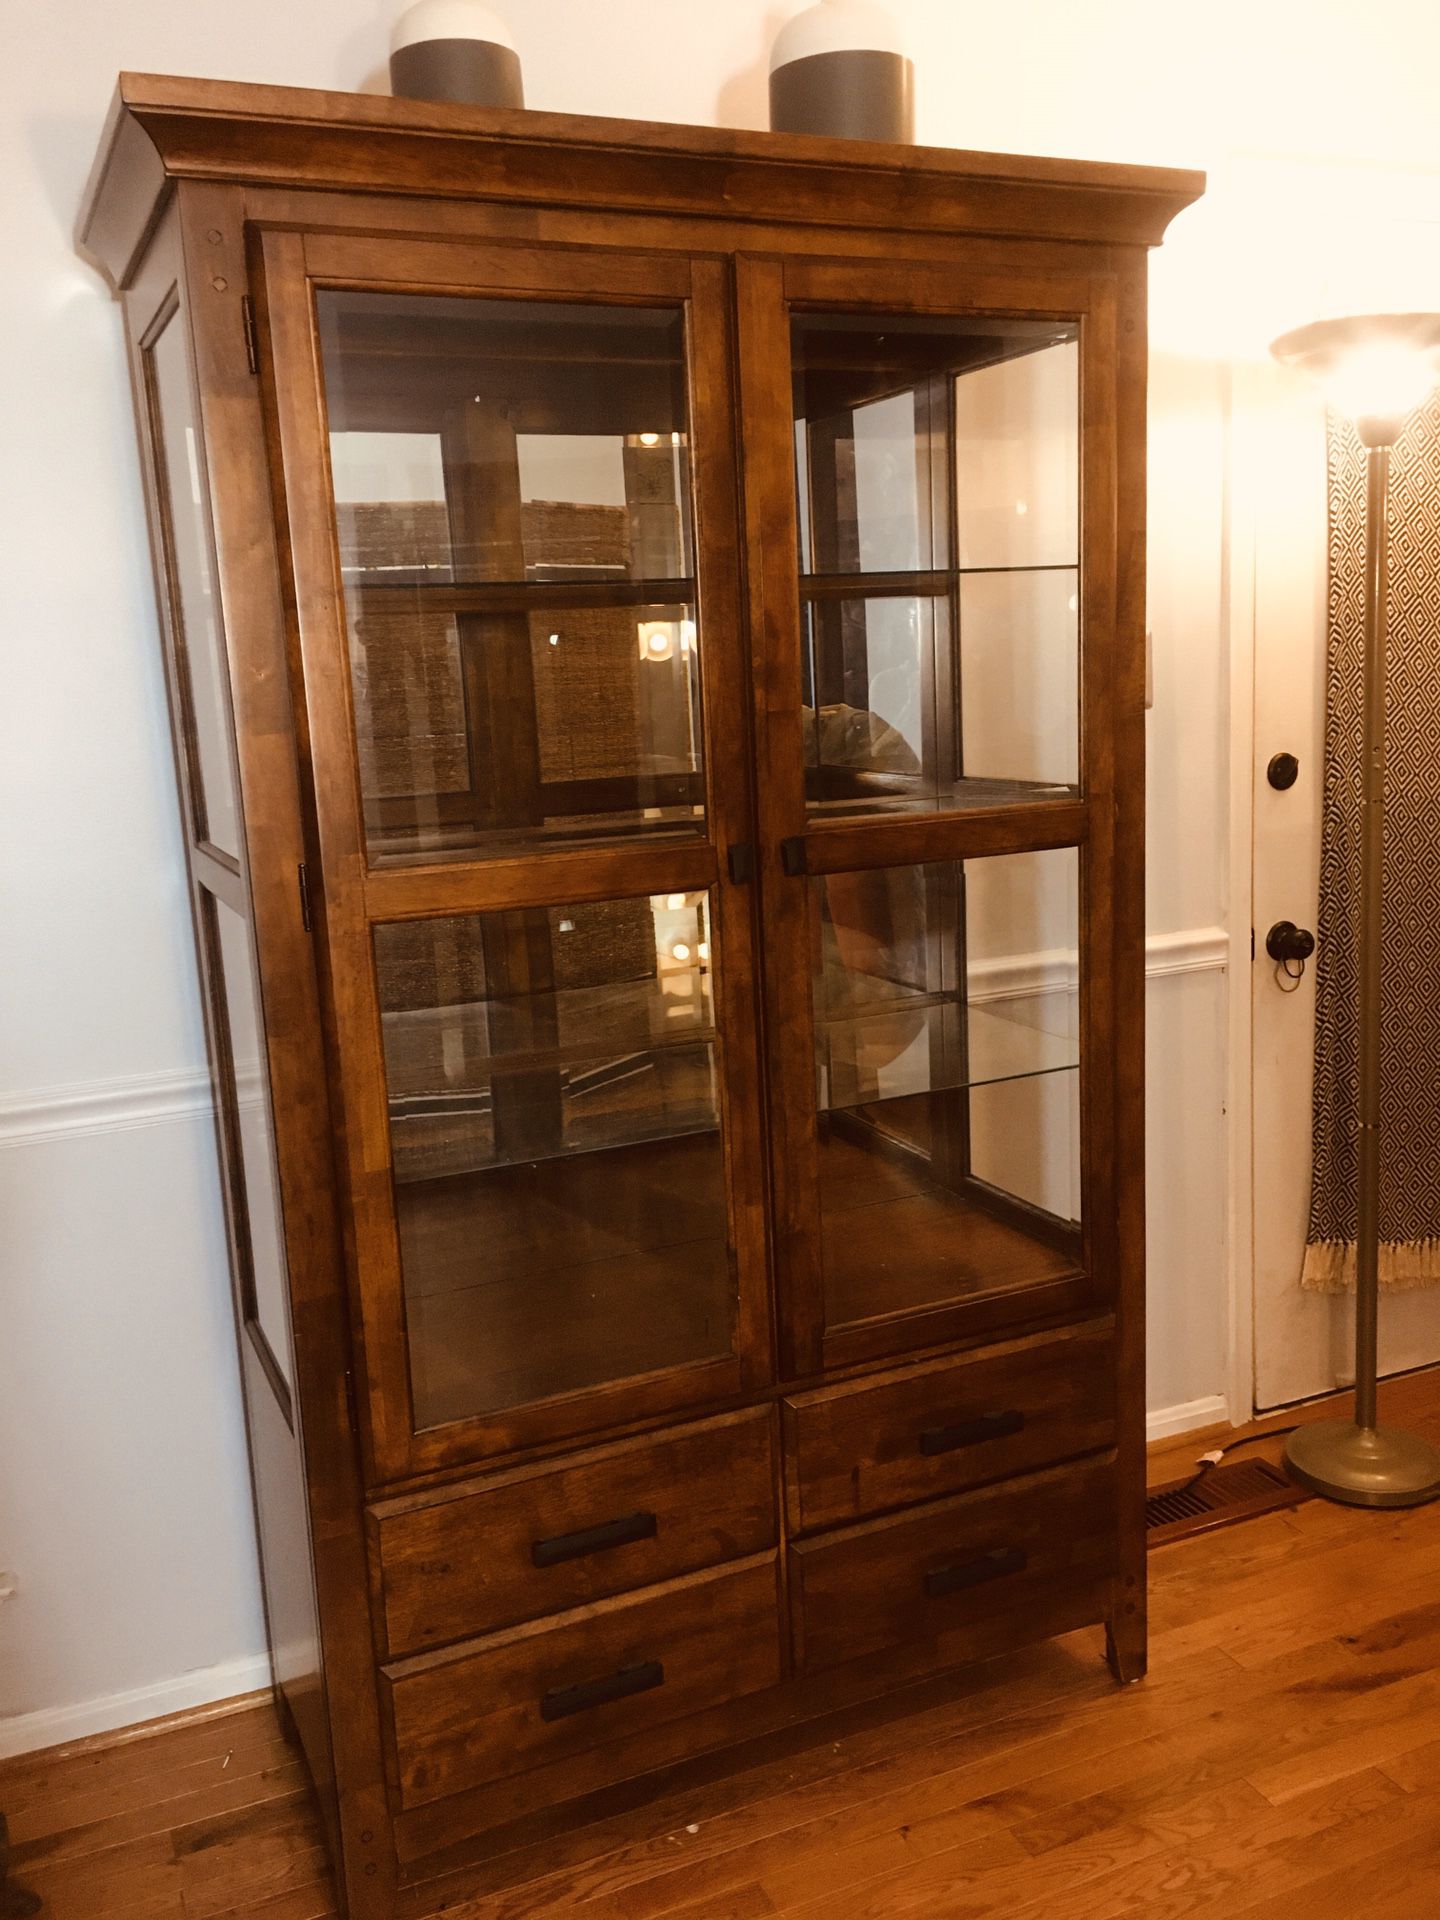 China cabinet with glass shelves (or best offer)